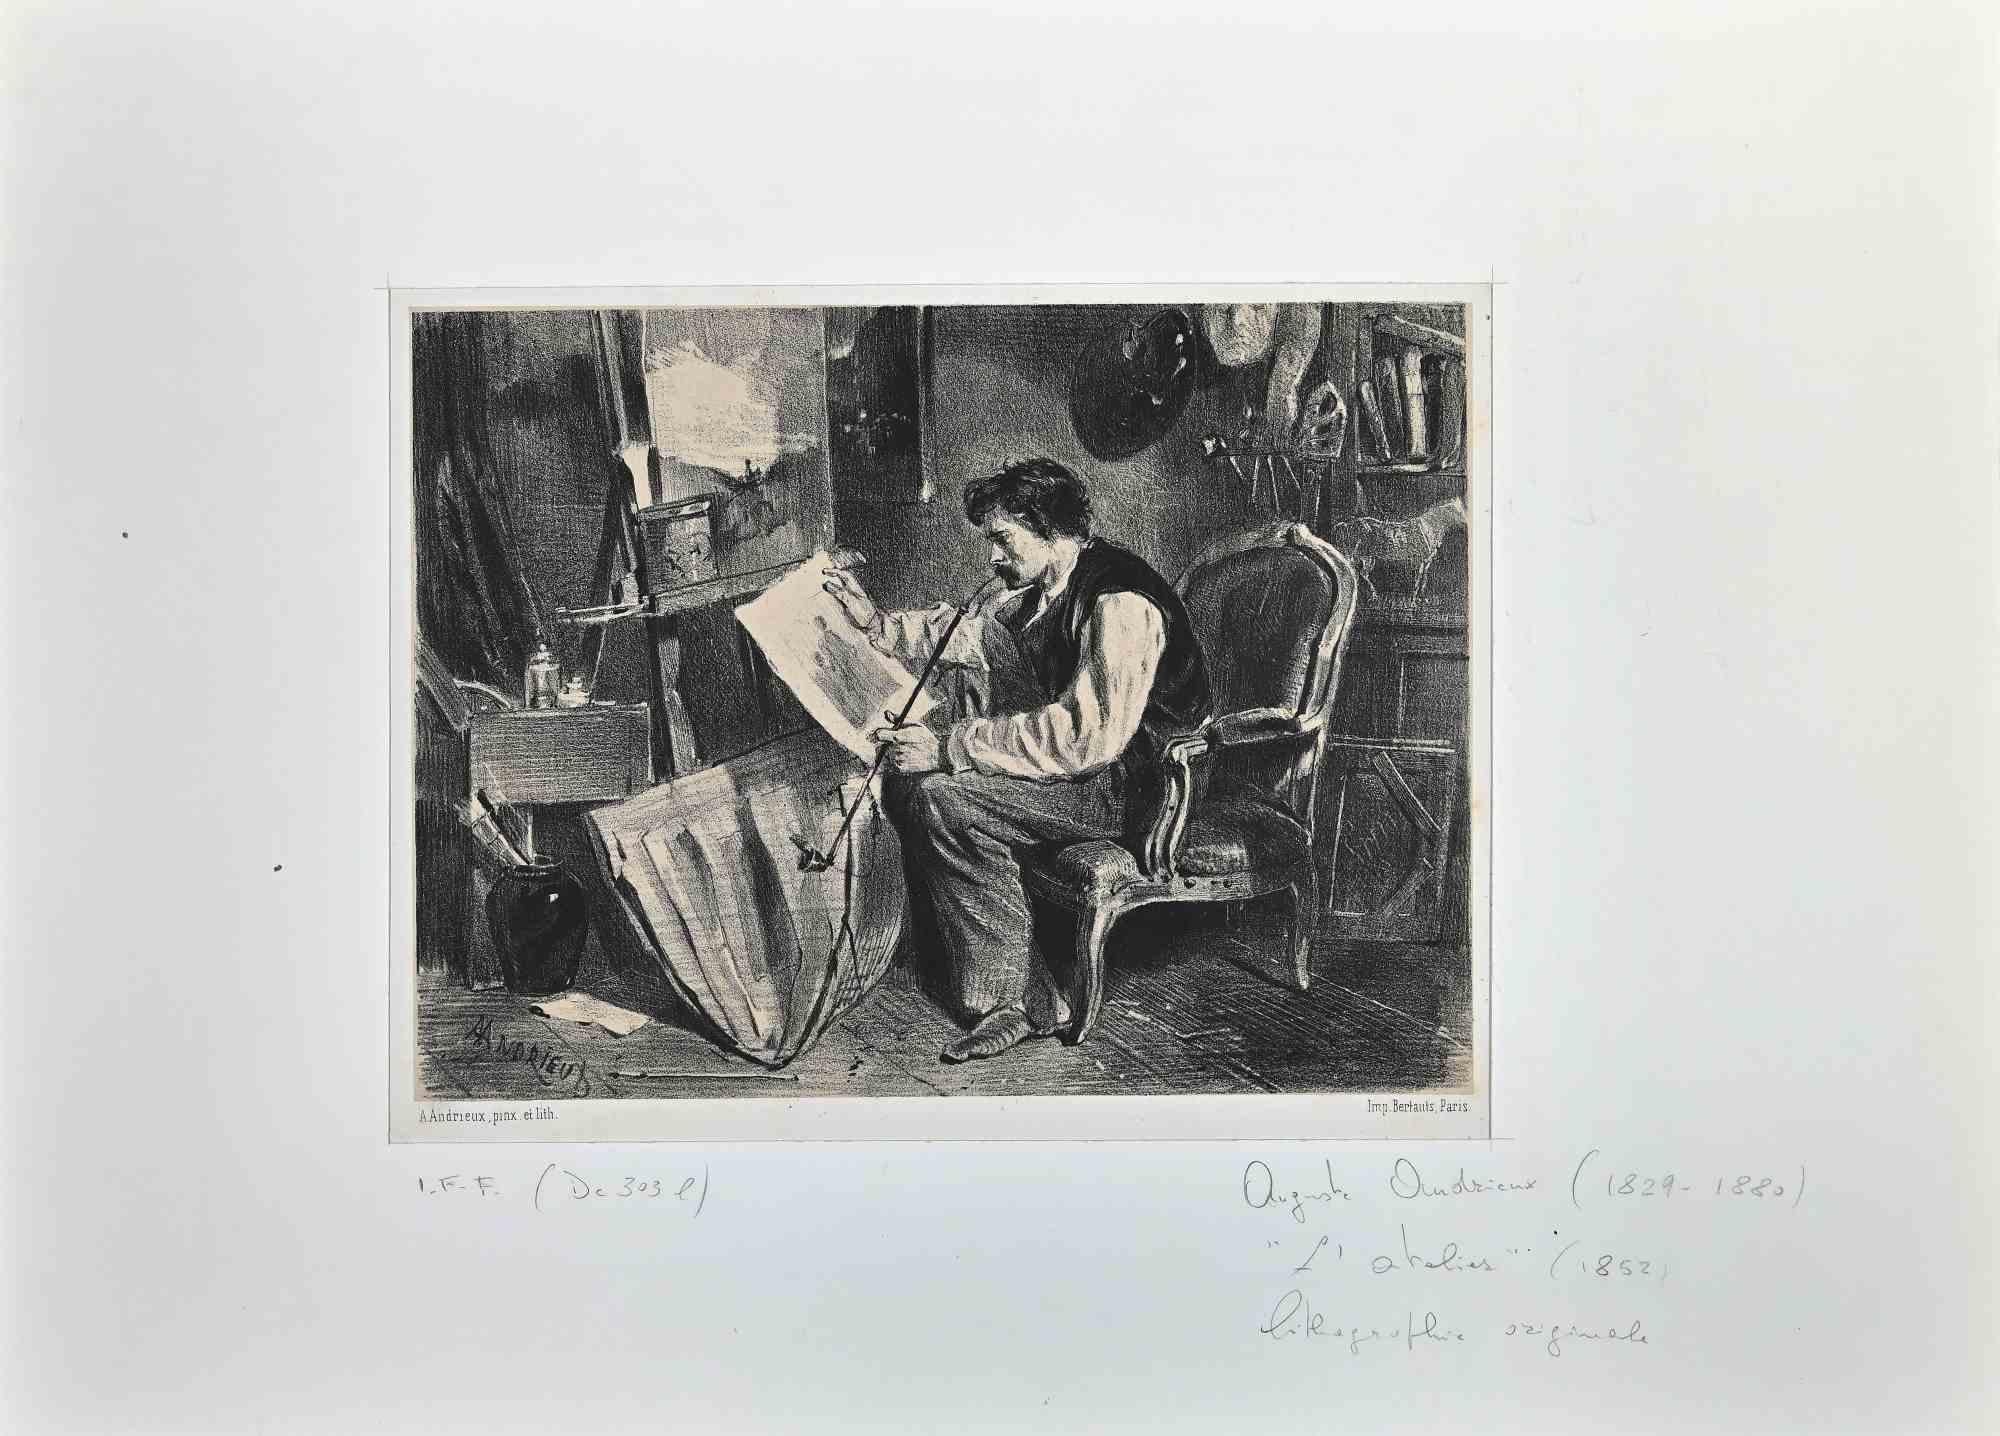 The Workshop is an Original Lithograph realized by Auguste Andrieux in 1852.

The artwork is in good condition included a white cardboard passpartout (32x43.5 cm).

Hand-signed by the artist on the lower left corner.

Clément-Auguste Andrieux (7